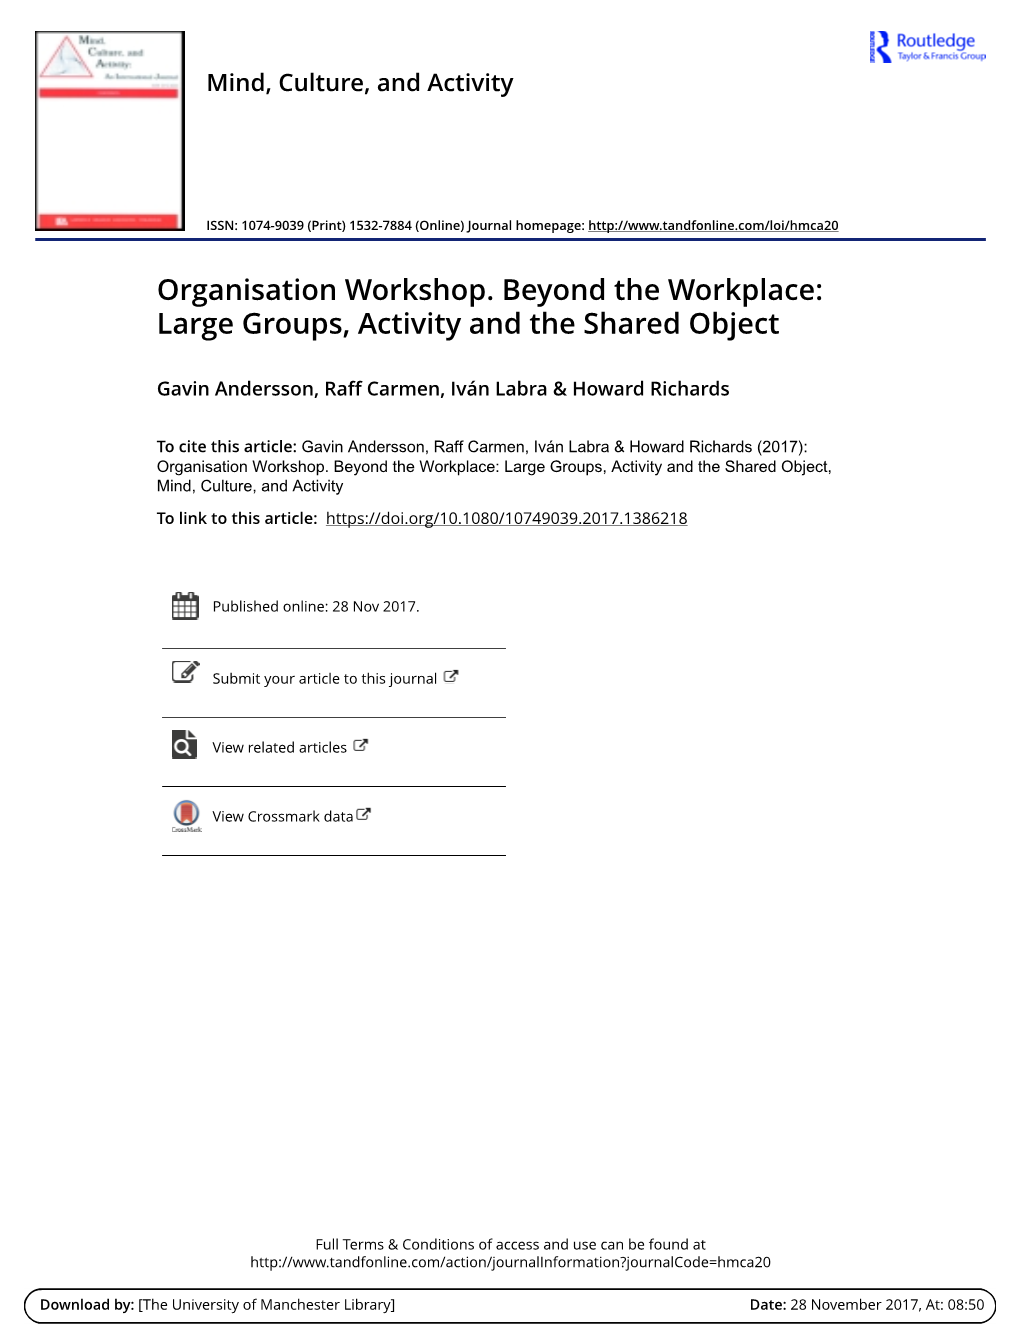 Organisation Workshop. Beyond the Workplace: Large Groups, Activity and the Shared Object